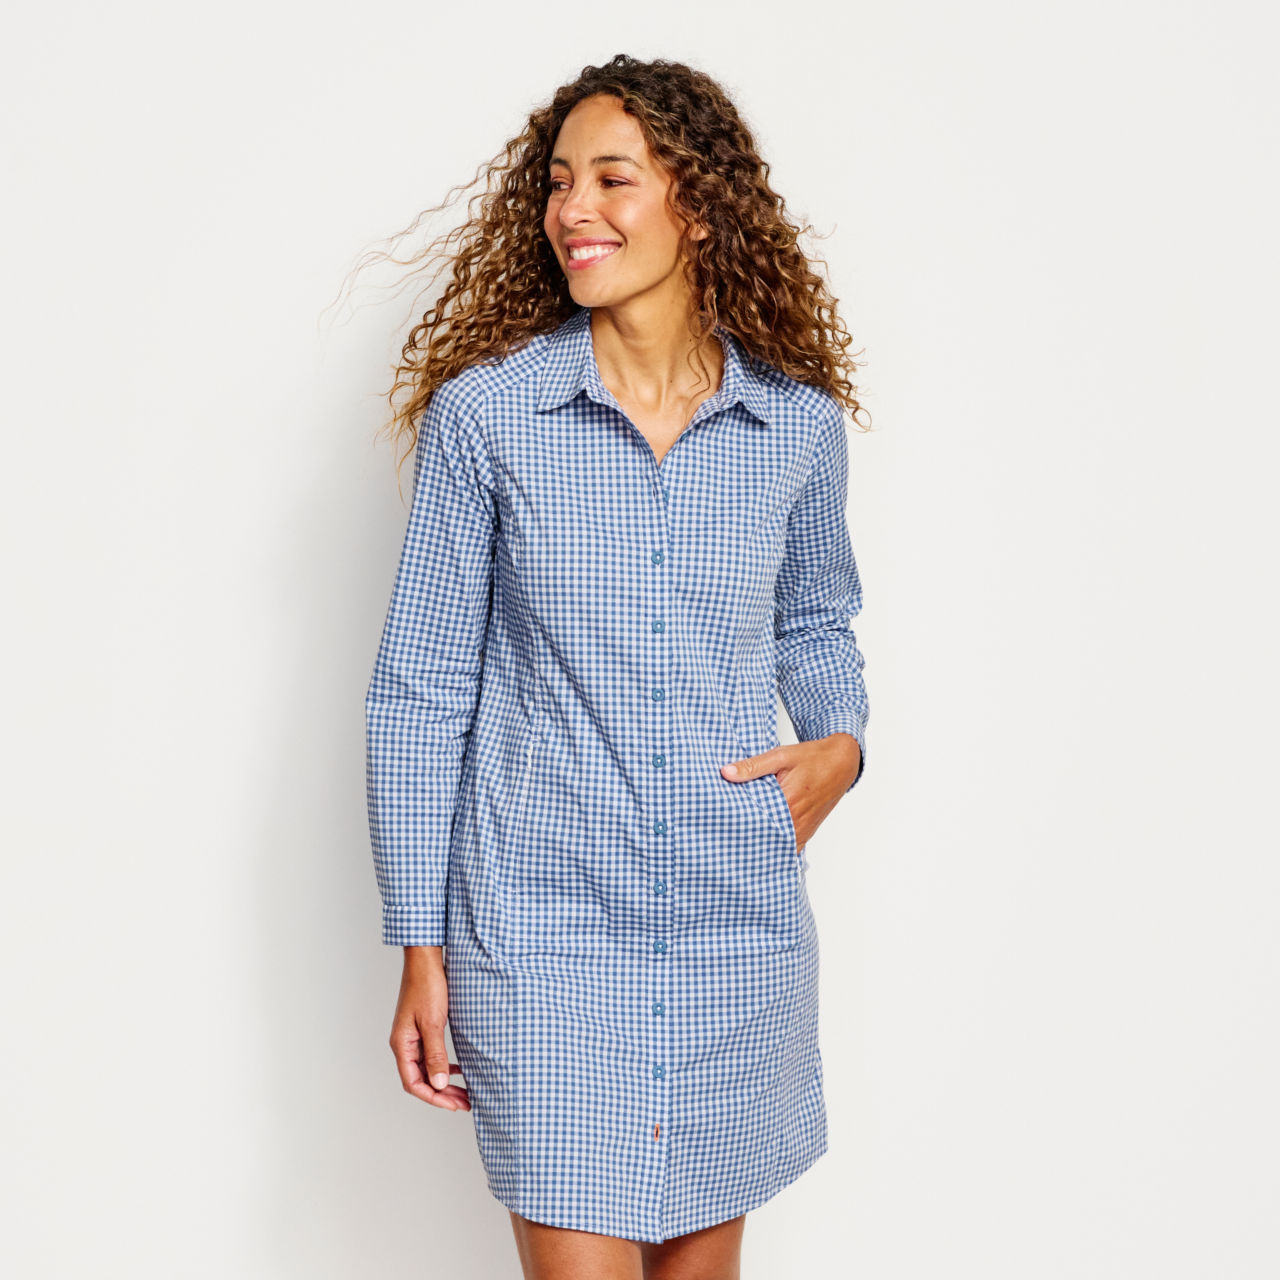 River Guide Long-Sleeved Dress - DUSTY BLUE CHECK image number 0